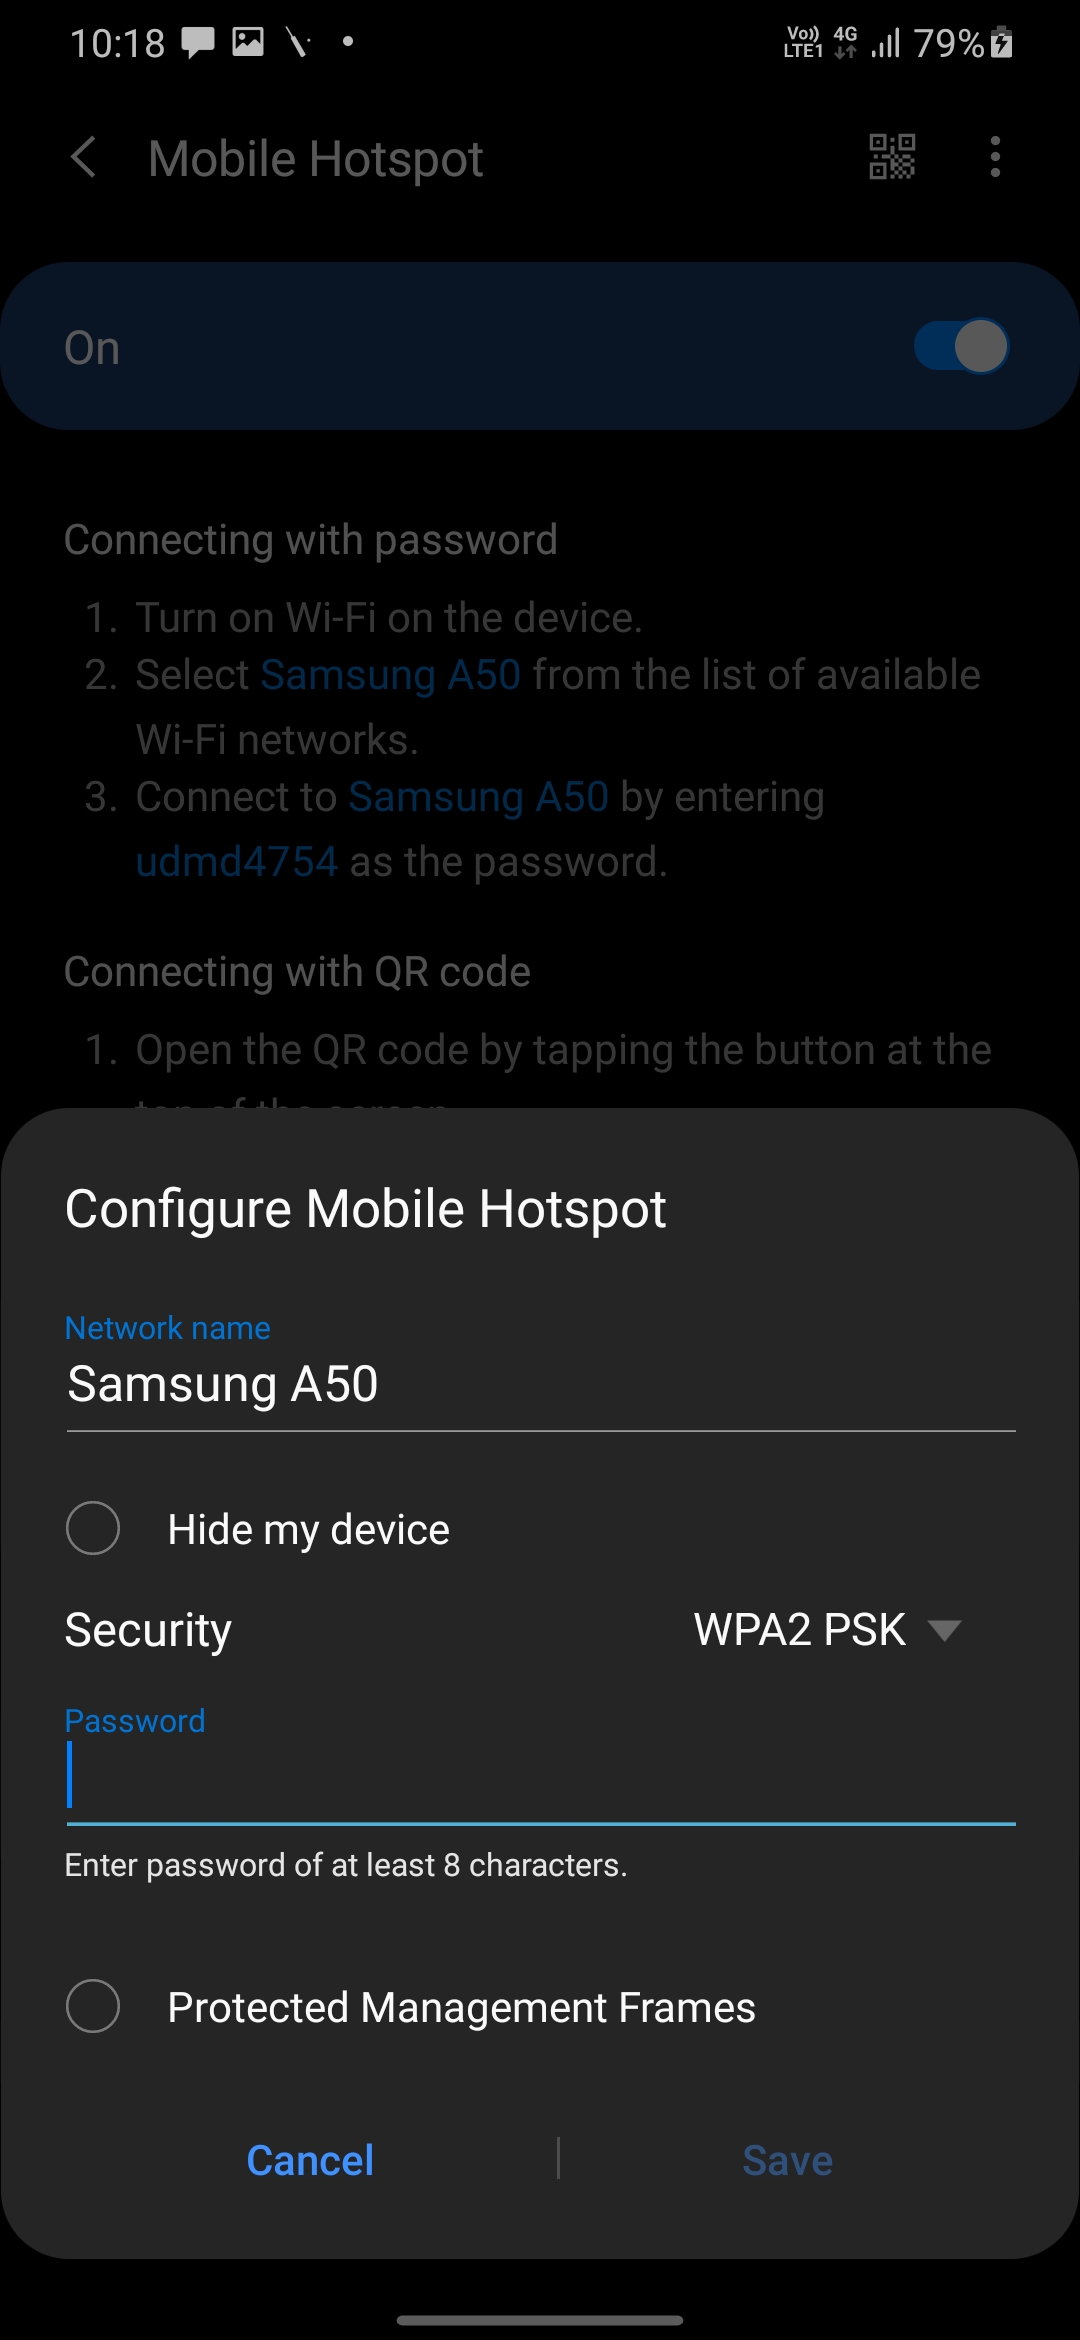 Does A50 support 5.0 ghz wifi? - Samsung Members